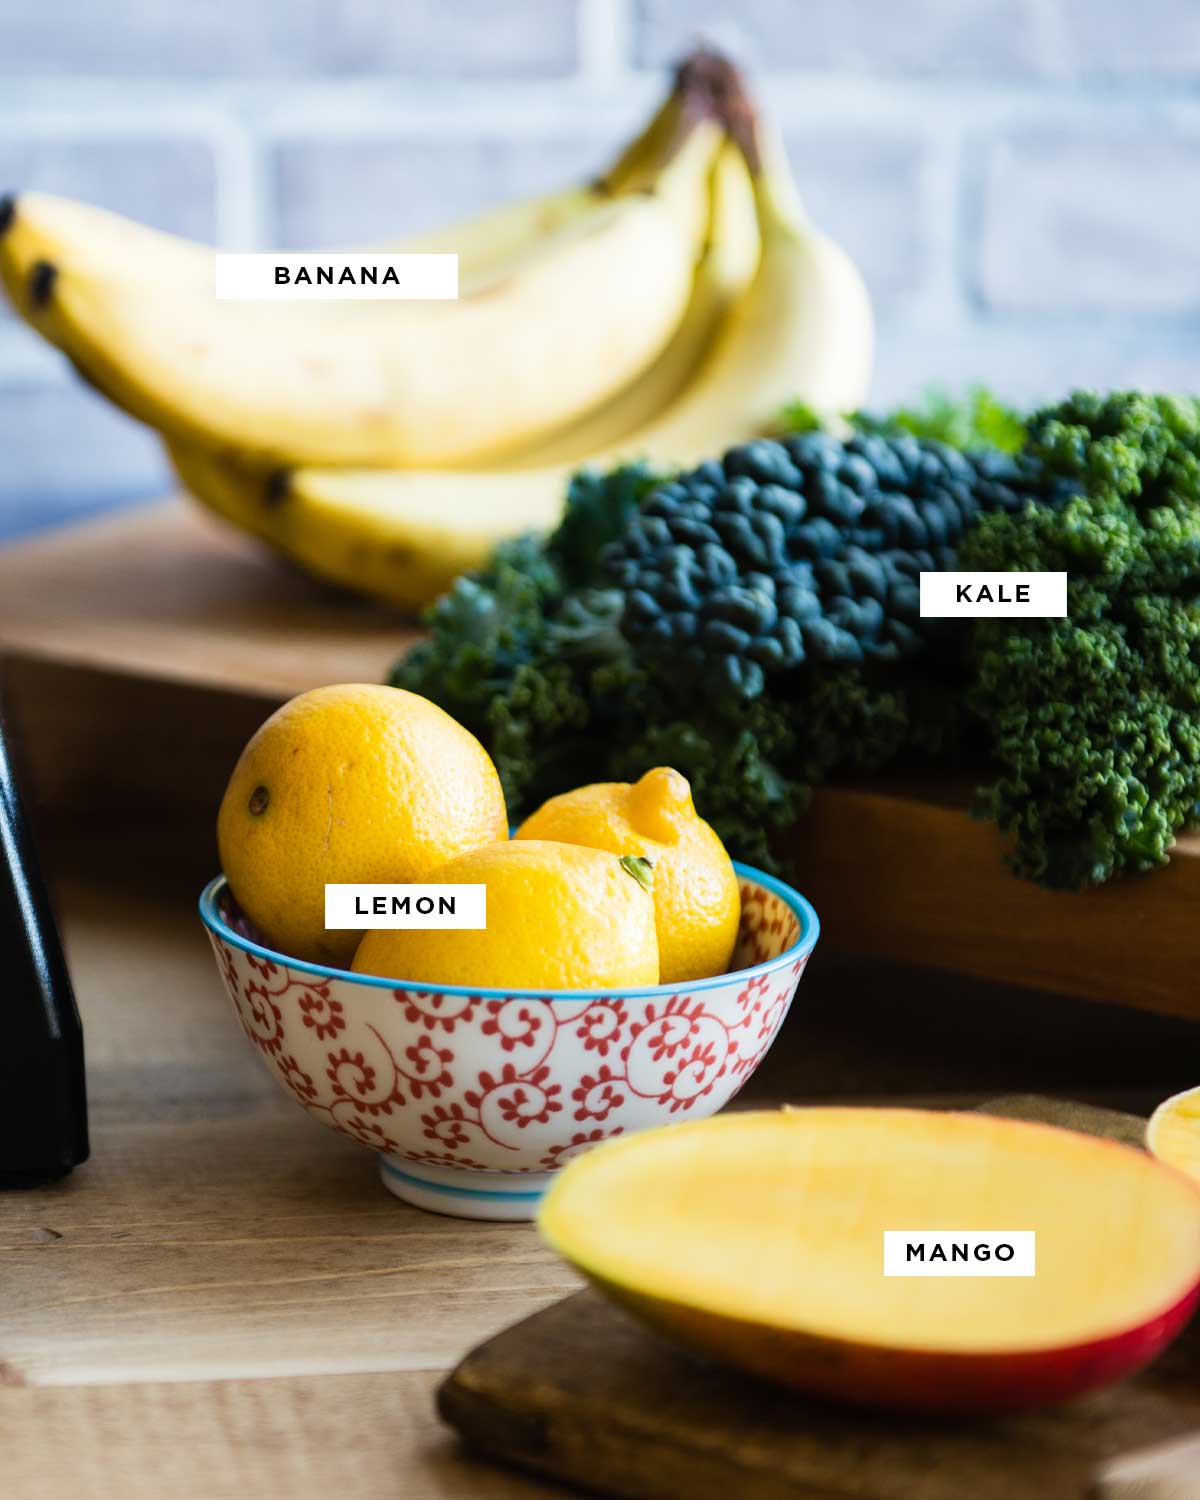 ingredients for a citrus smoothie recipe including bananas, kale, lemons and mango.